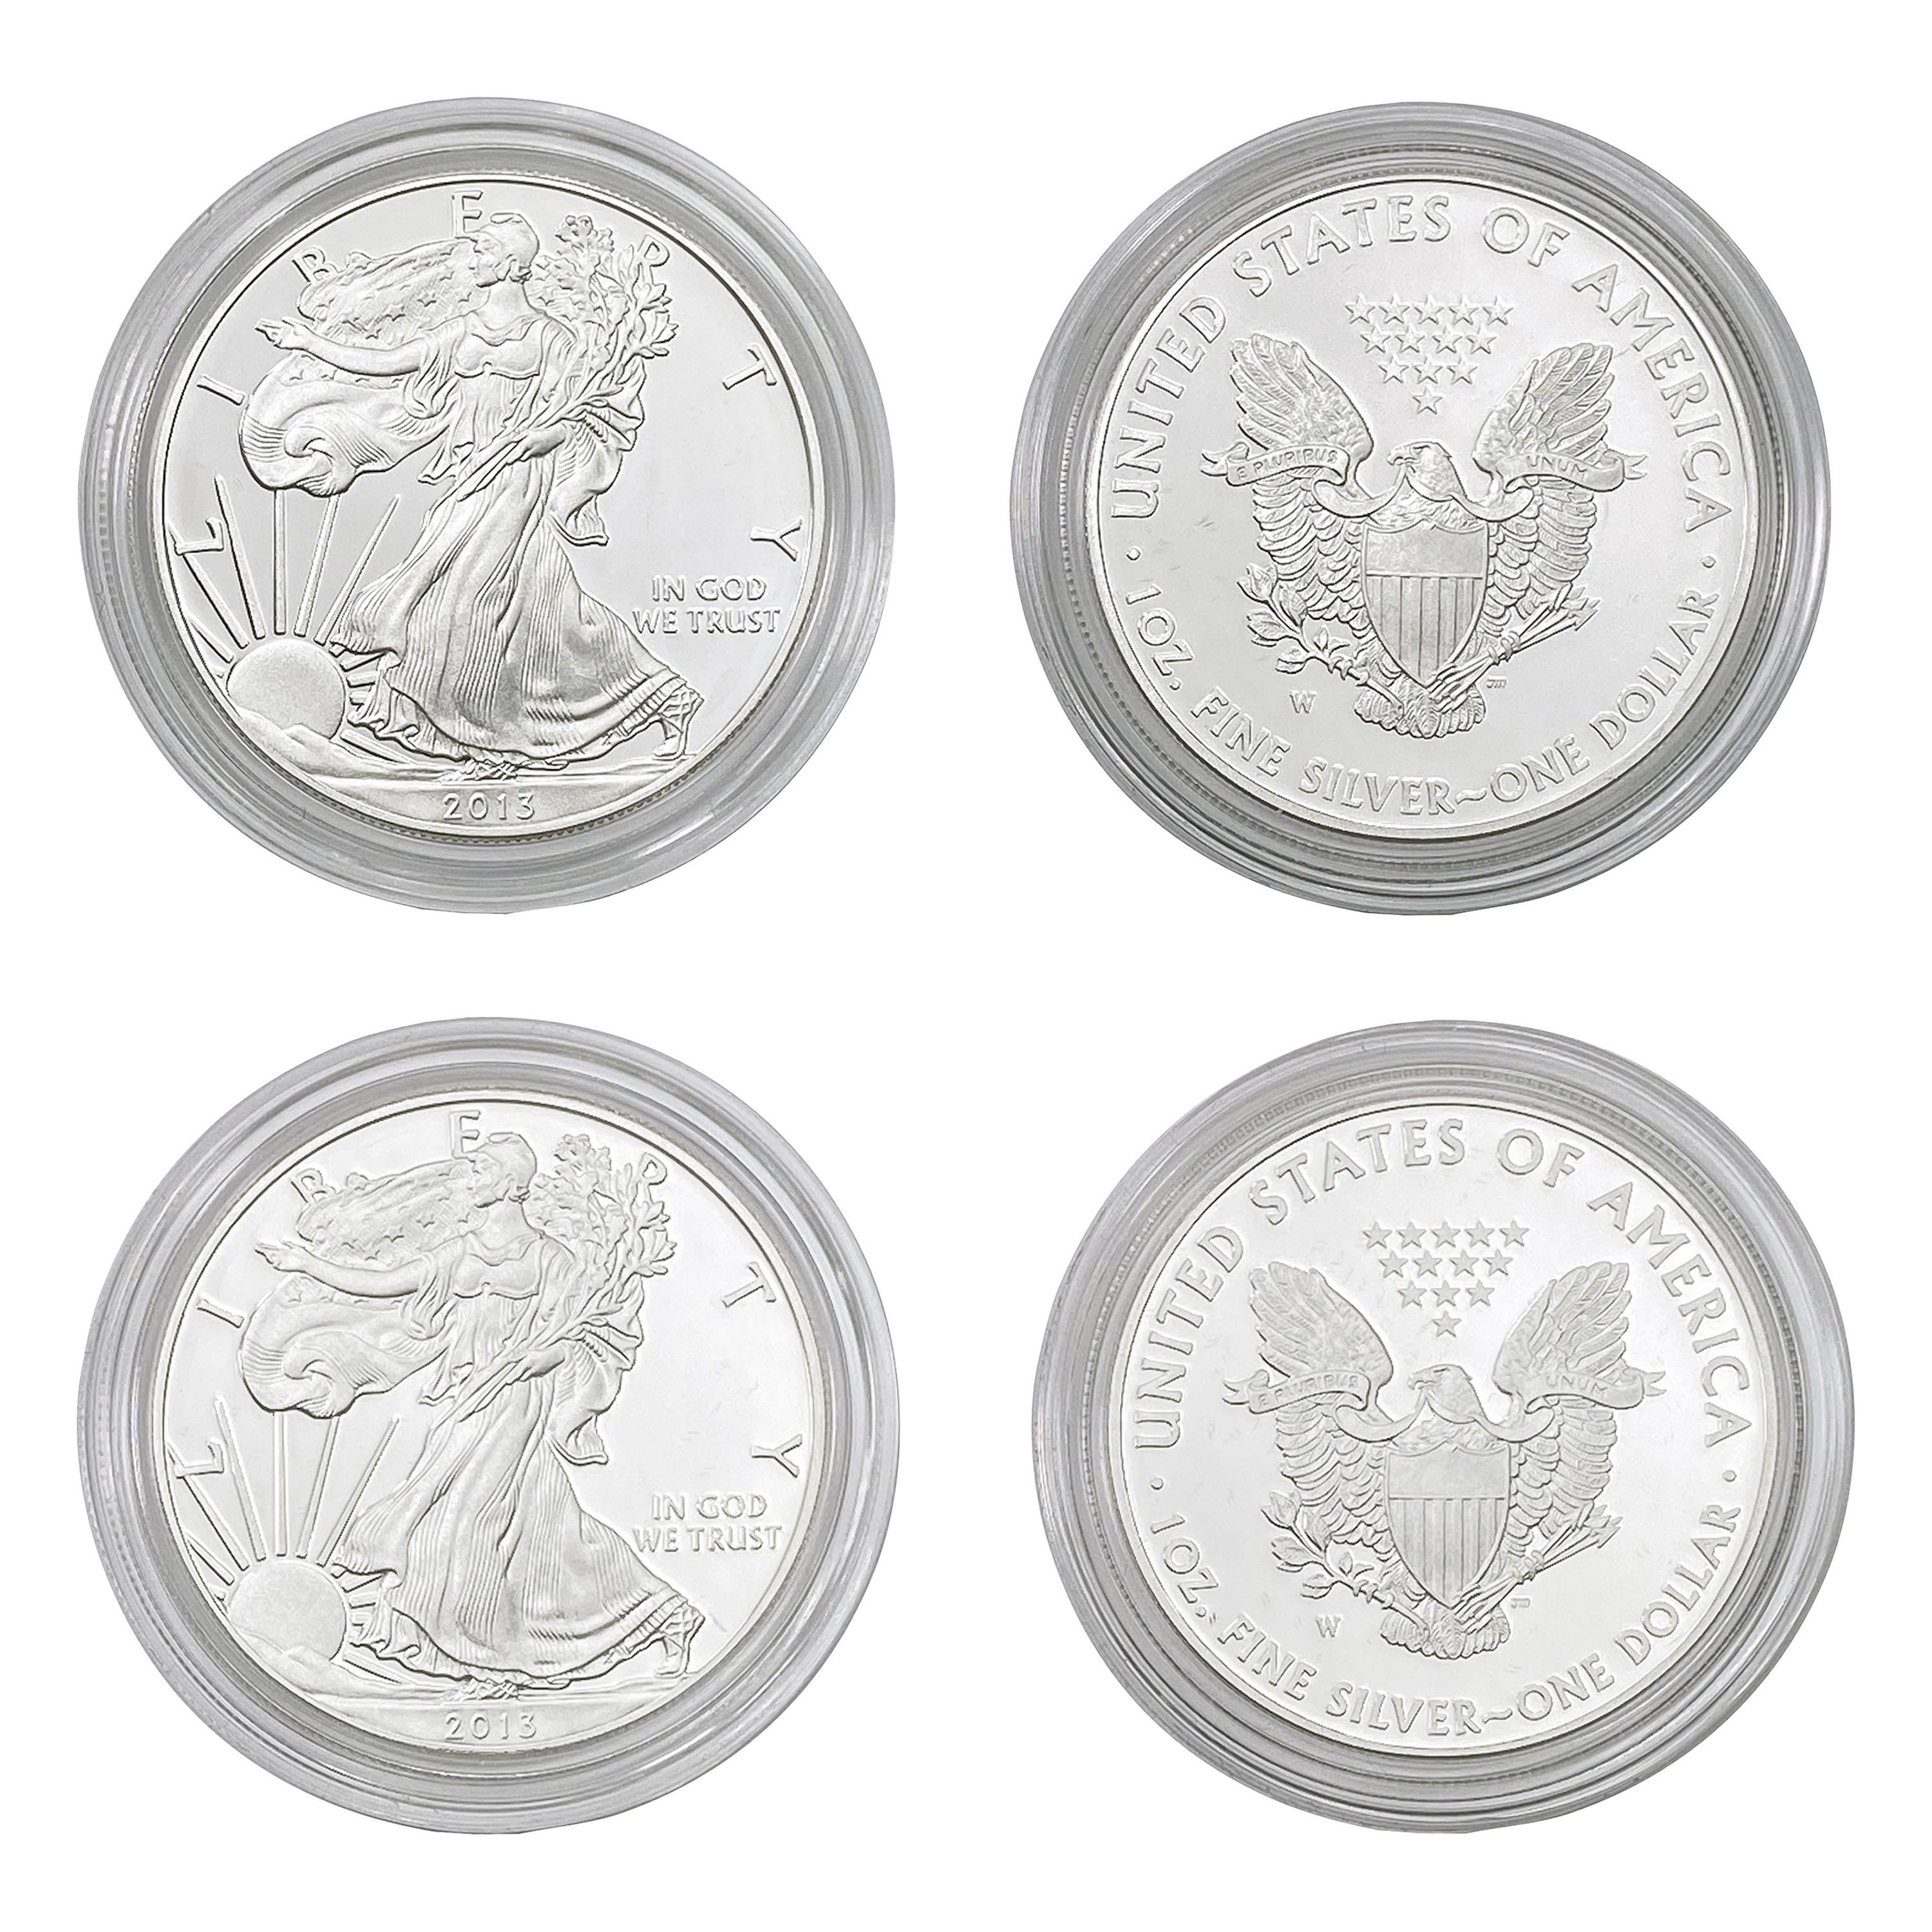 2013 US 1oz Silver Eagle Proof Coins [2 Coins]